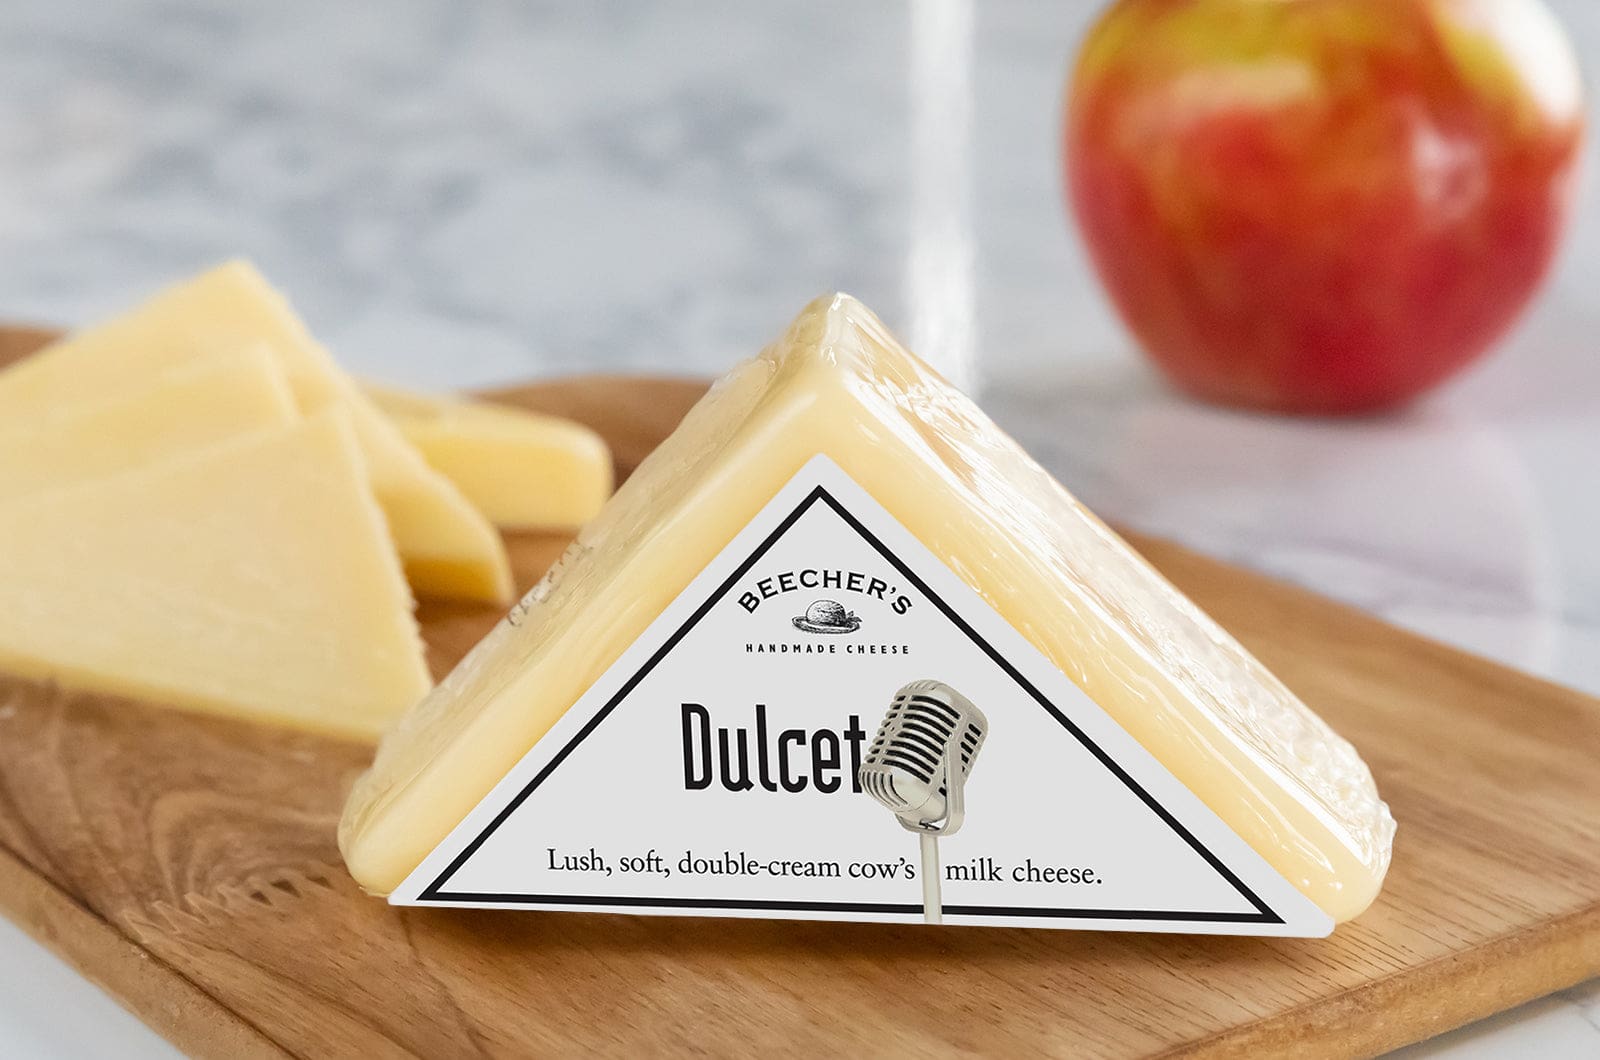 Dulcet cheese beauty shot with packaging